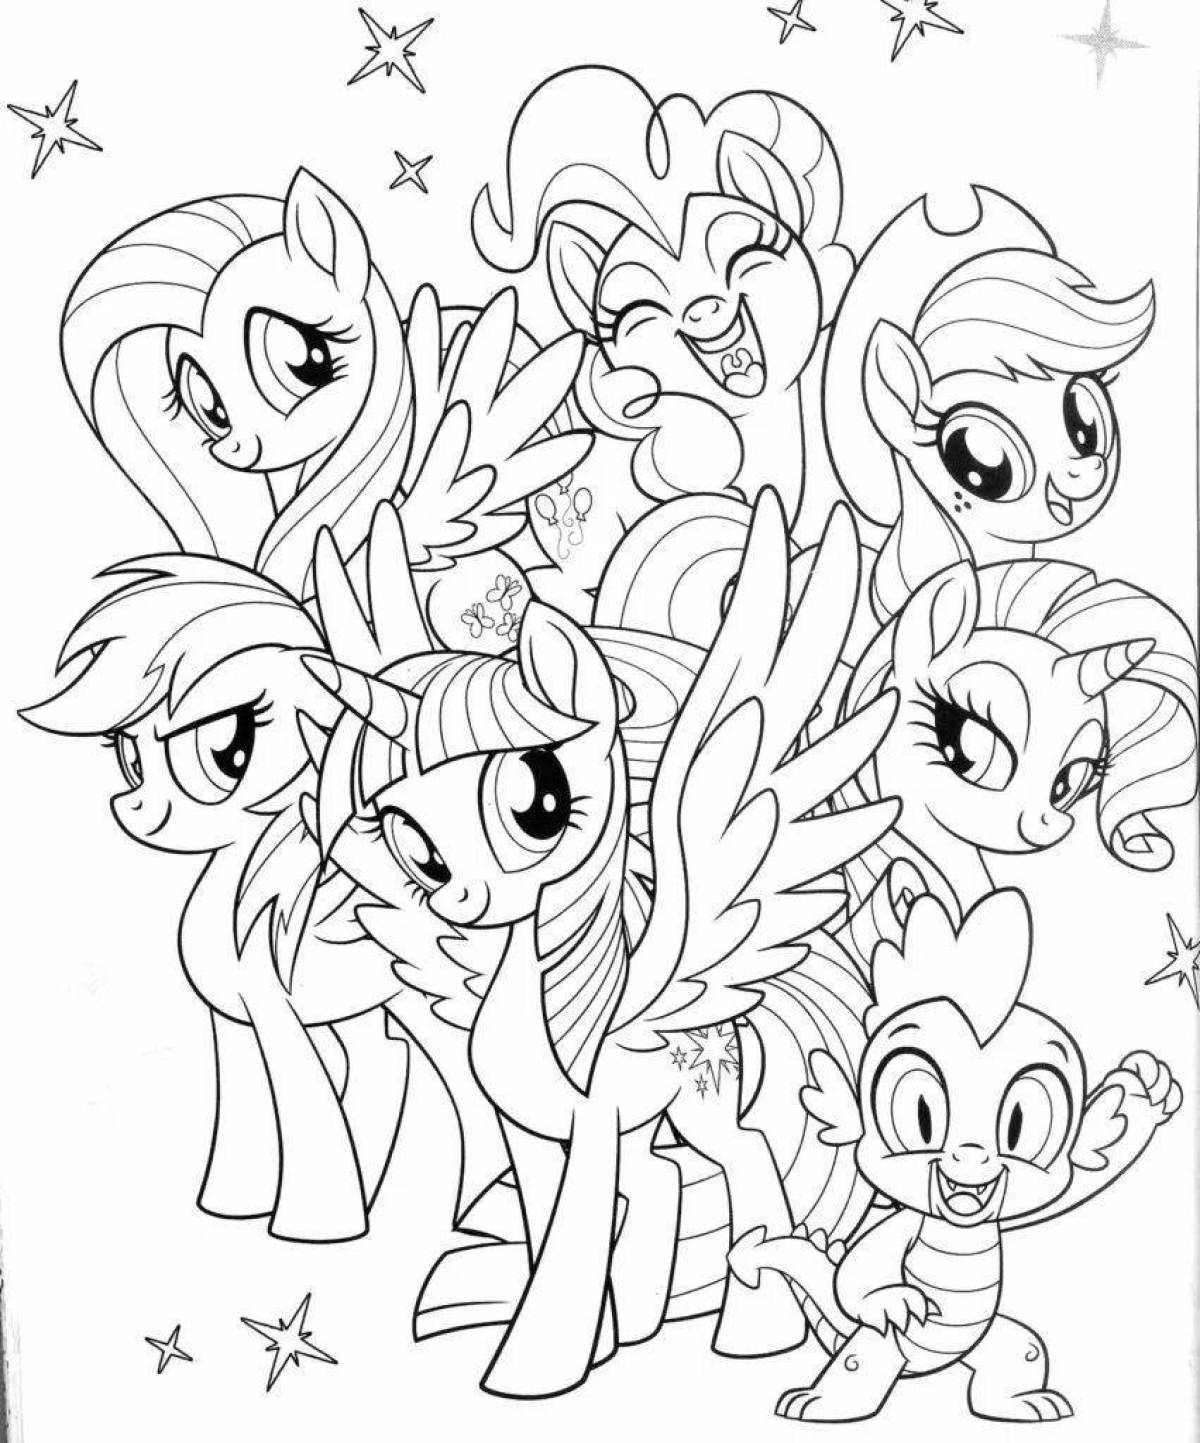 Exciting pip pony coloring book